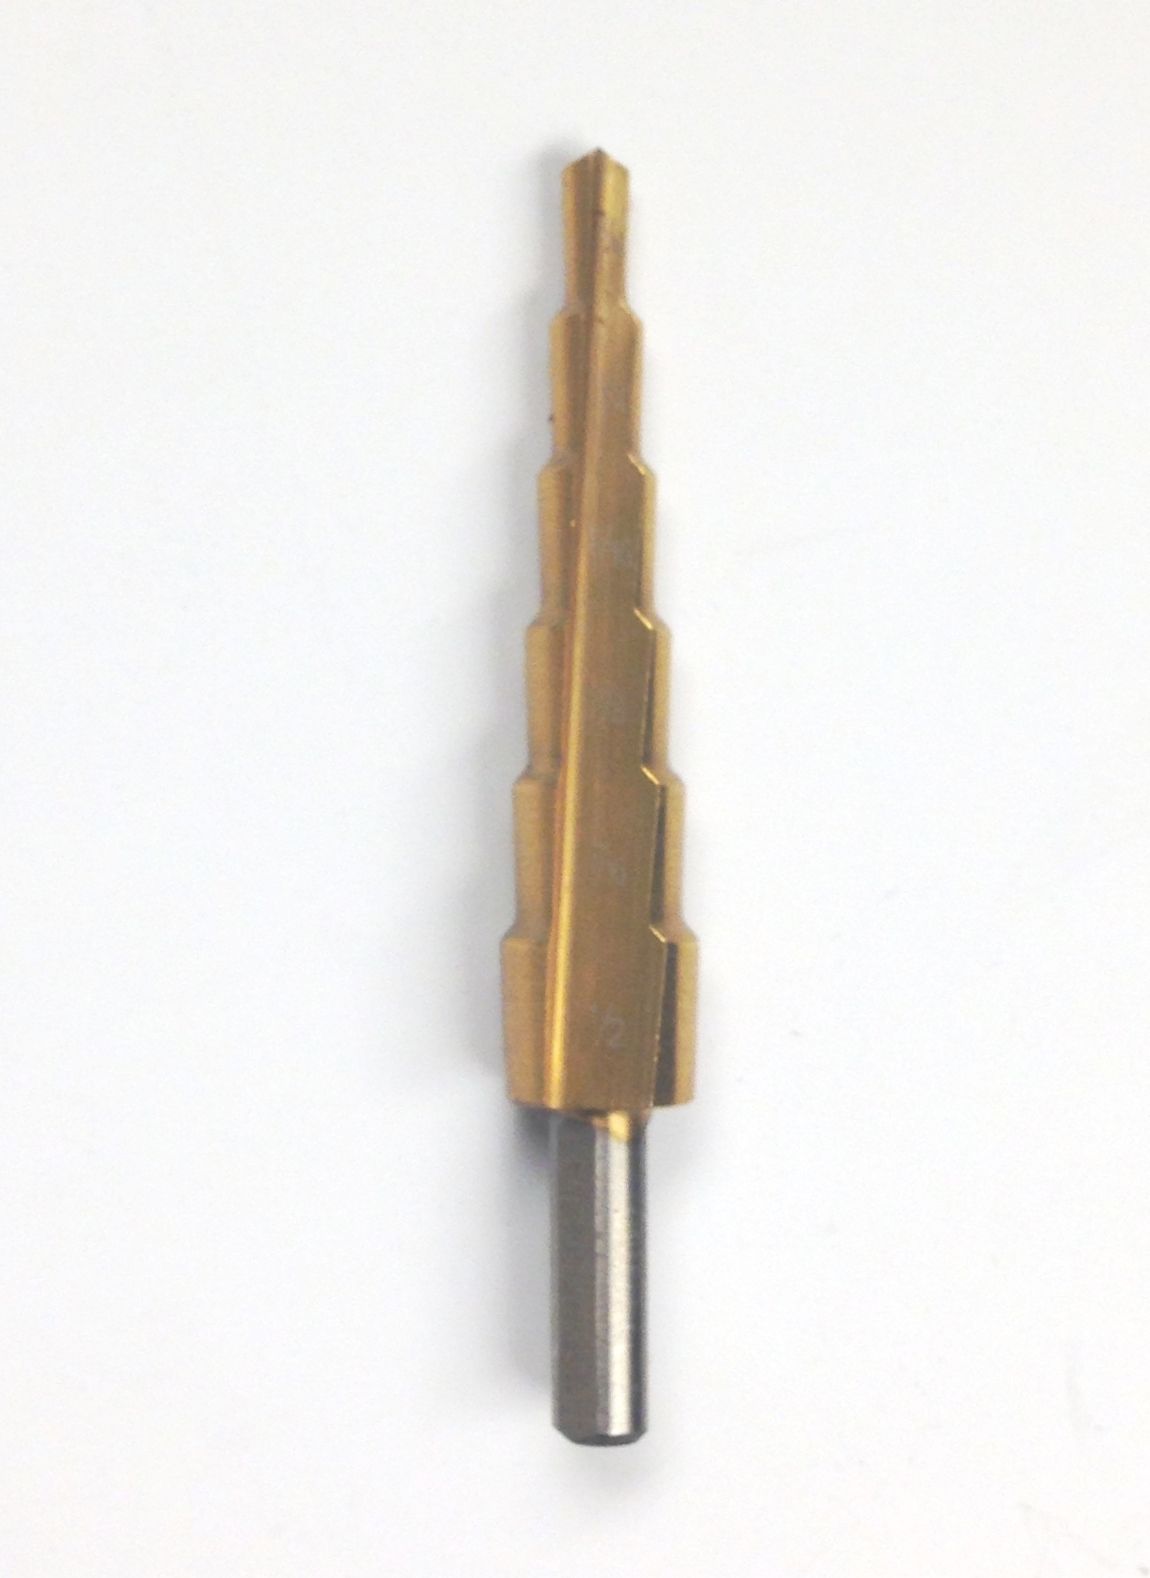 3/16-1/2" TiN COATED HIGH SPEED STEEL STEP DRILL WITH 6 STEPS (5000-0014)